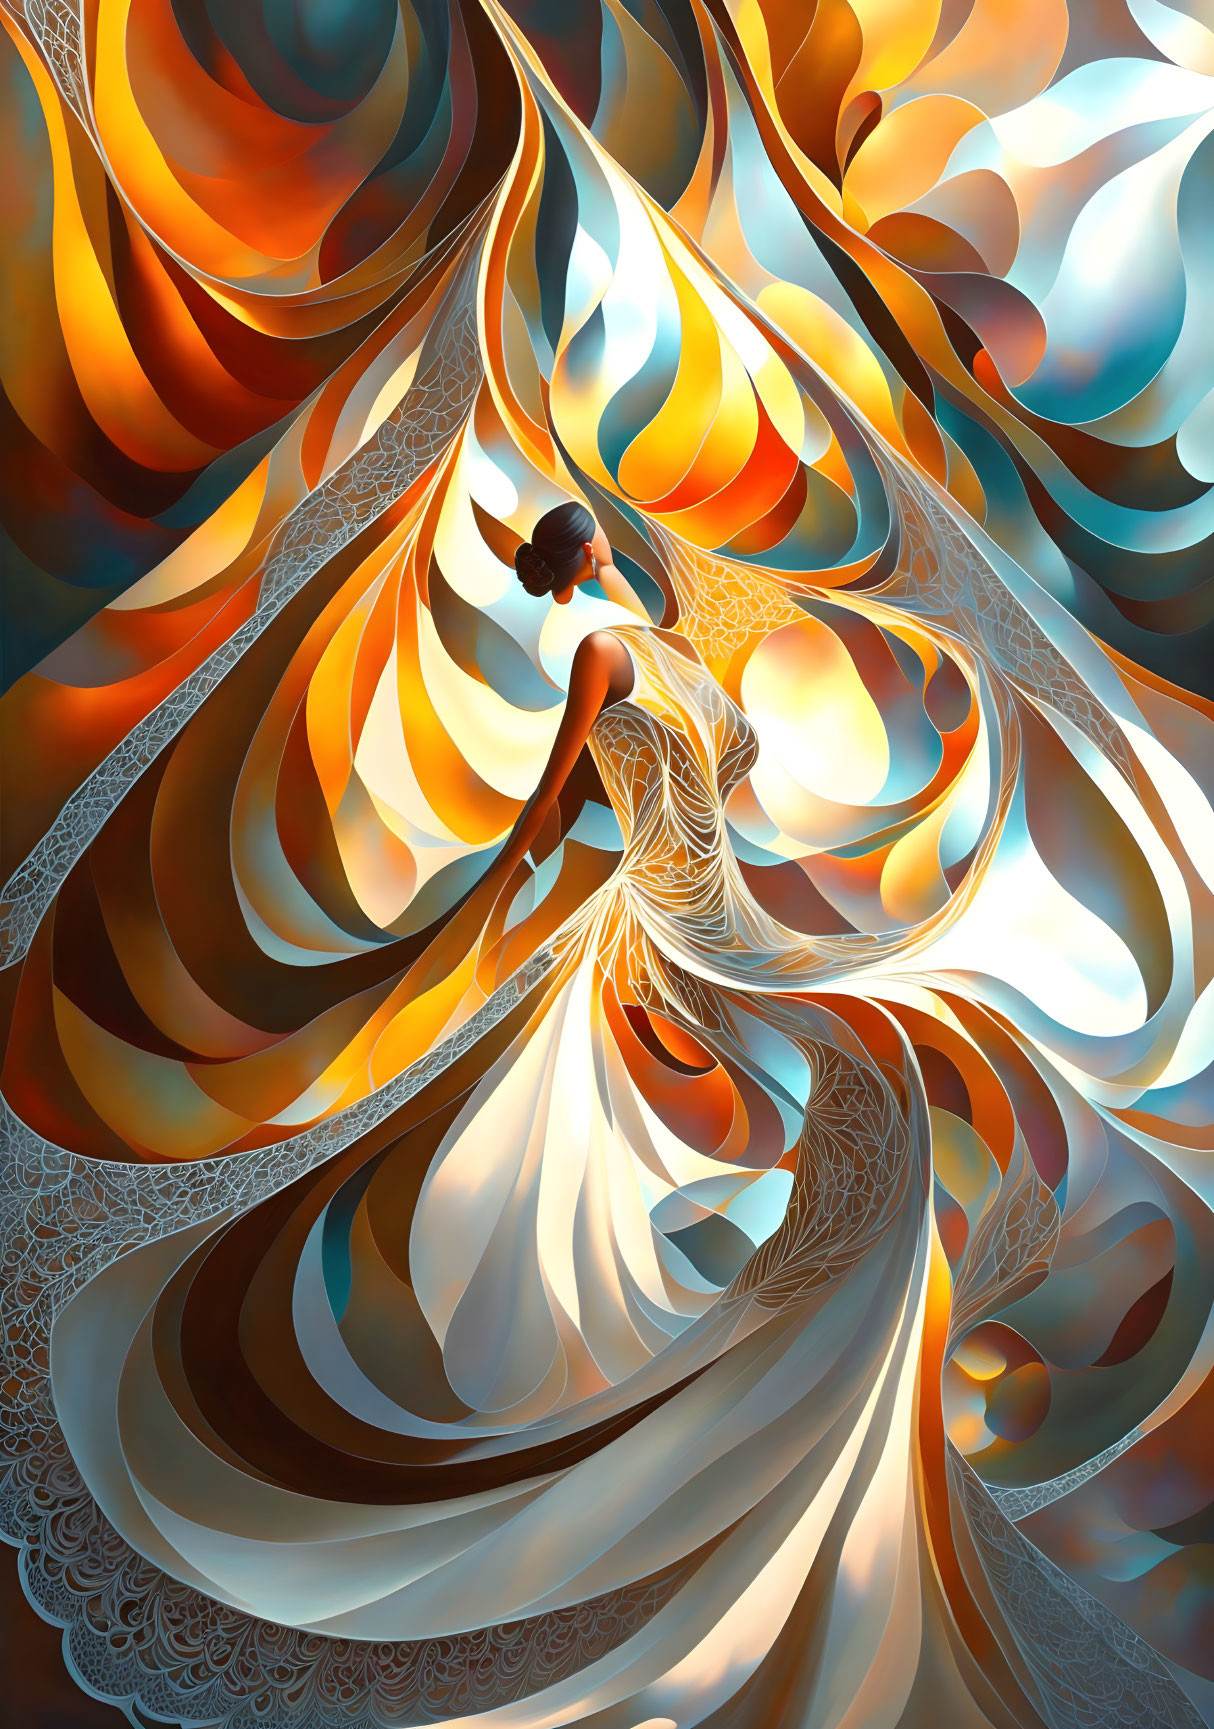 Intricate digital artwork of a woman in a flowing gown